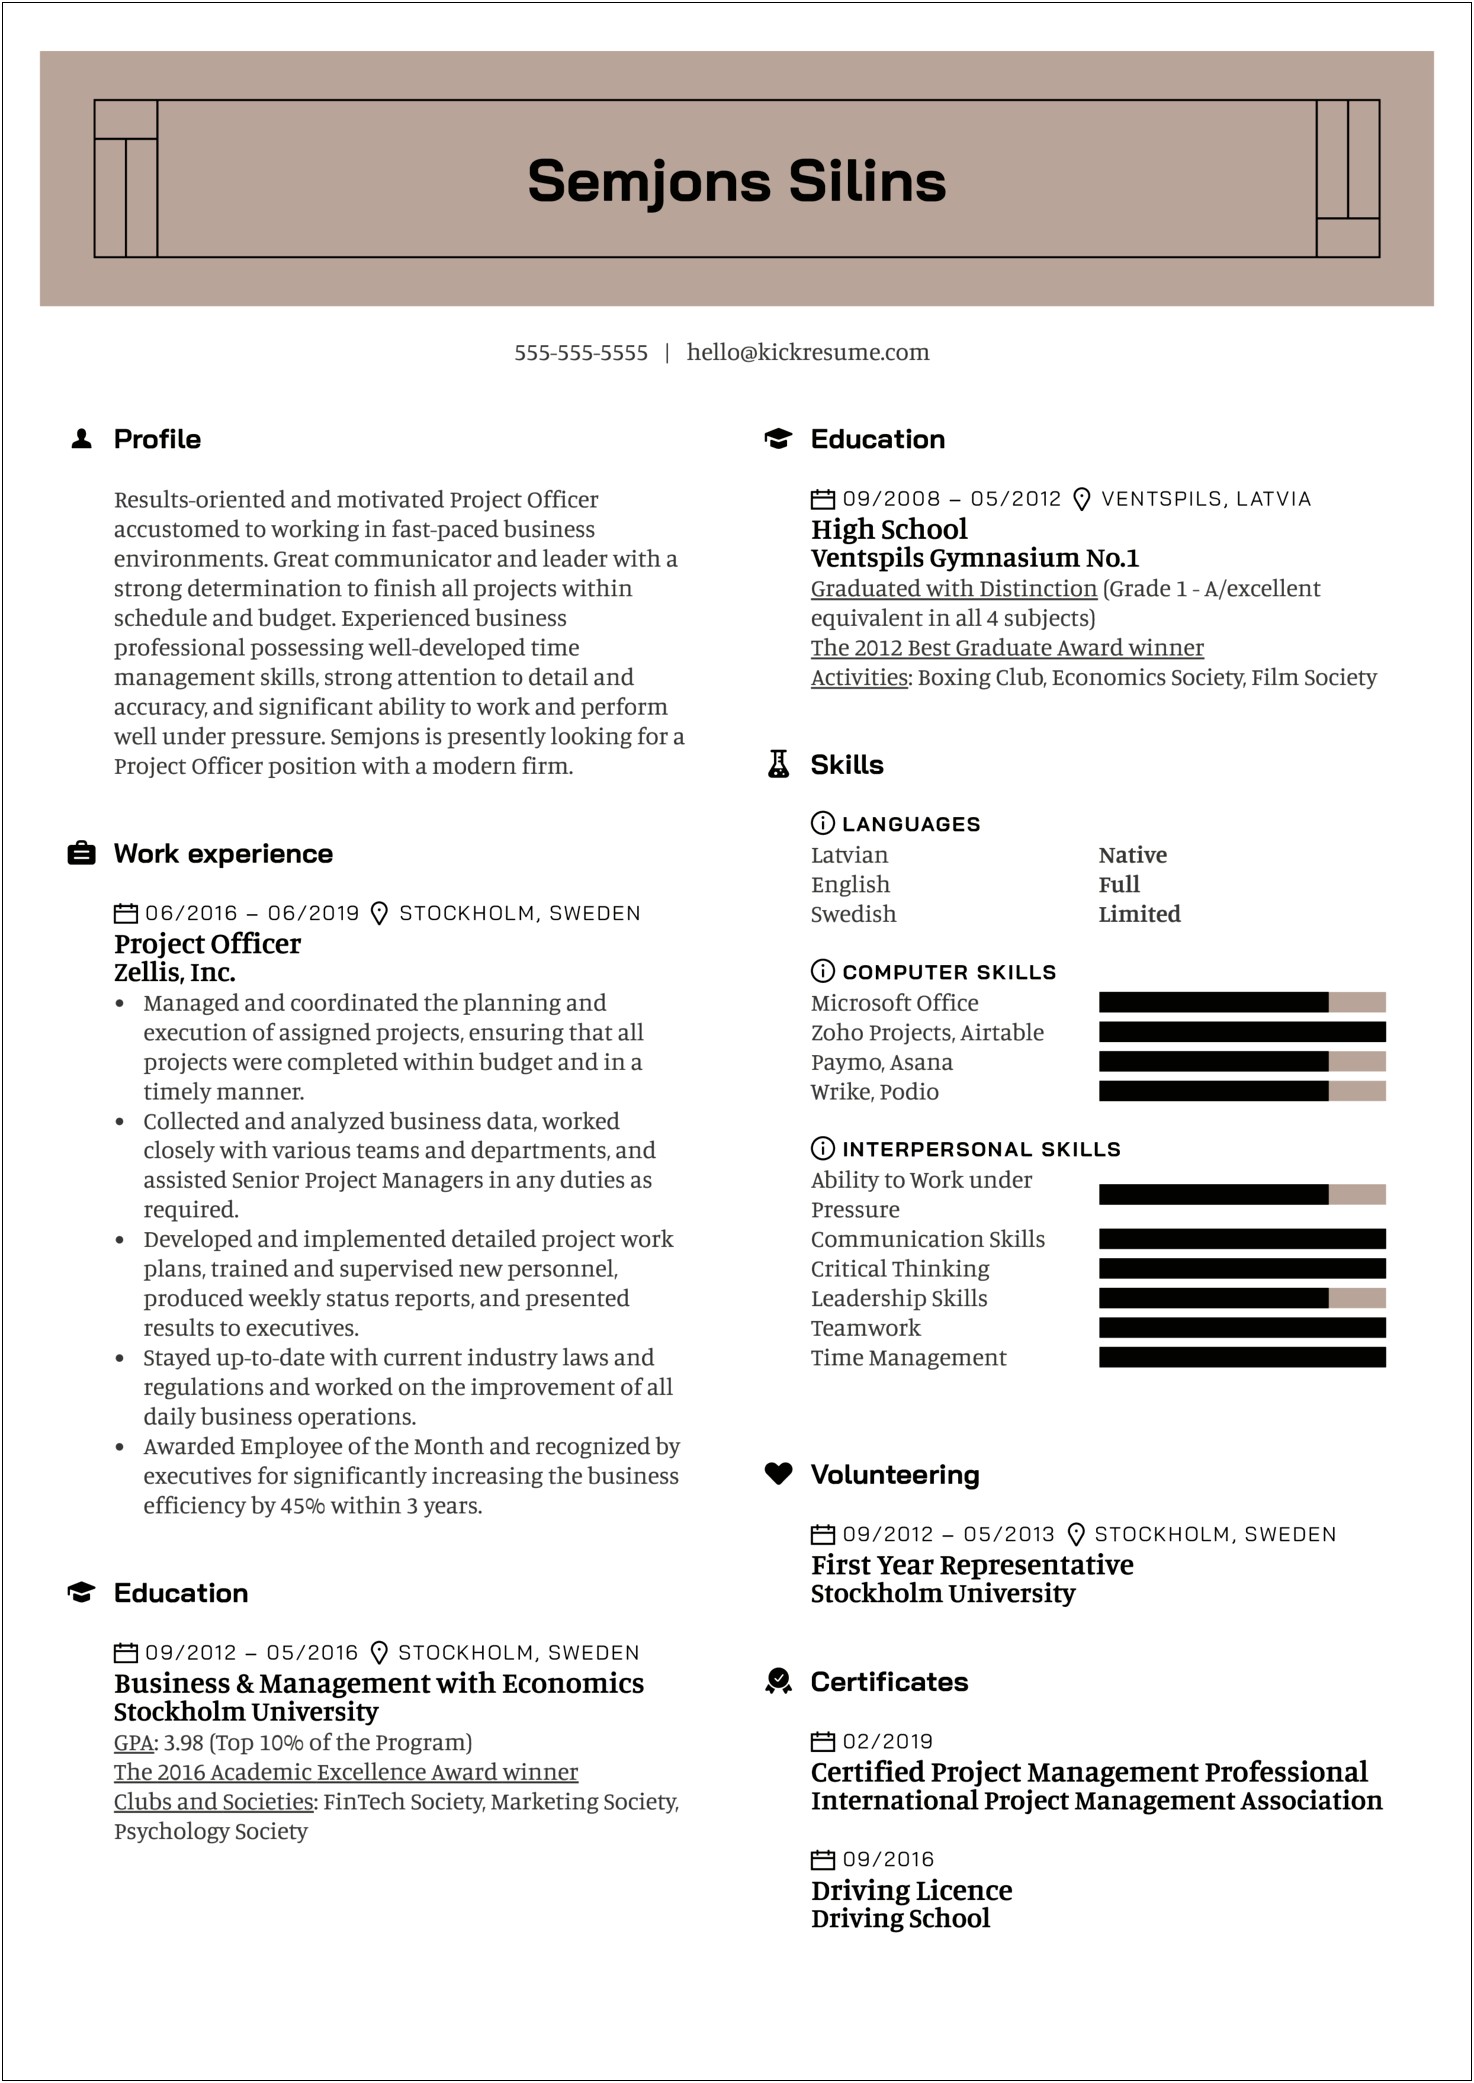 Examples Of Excellent Resumes 2019